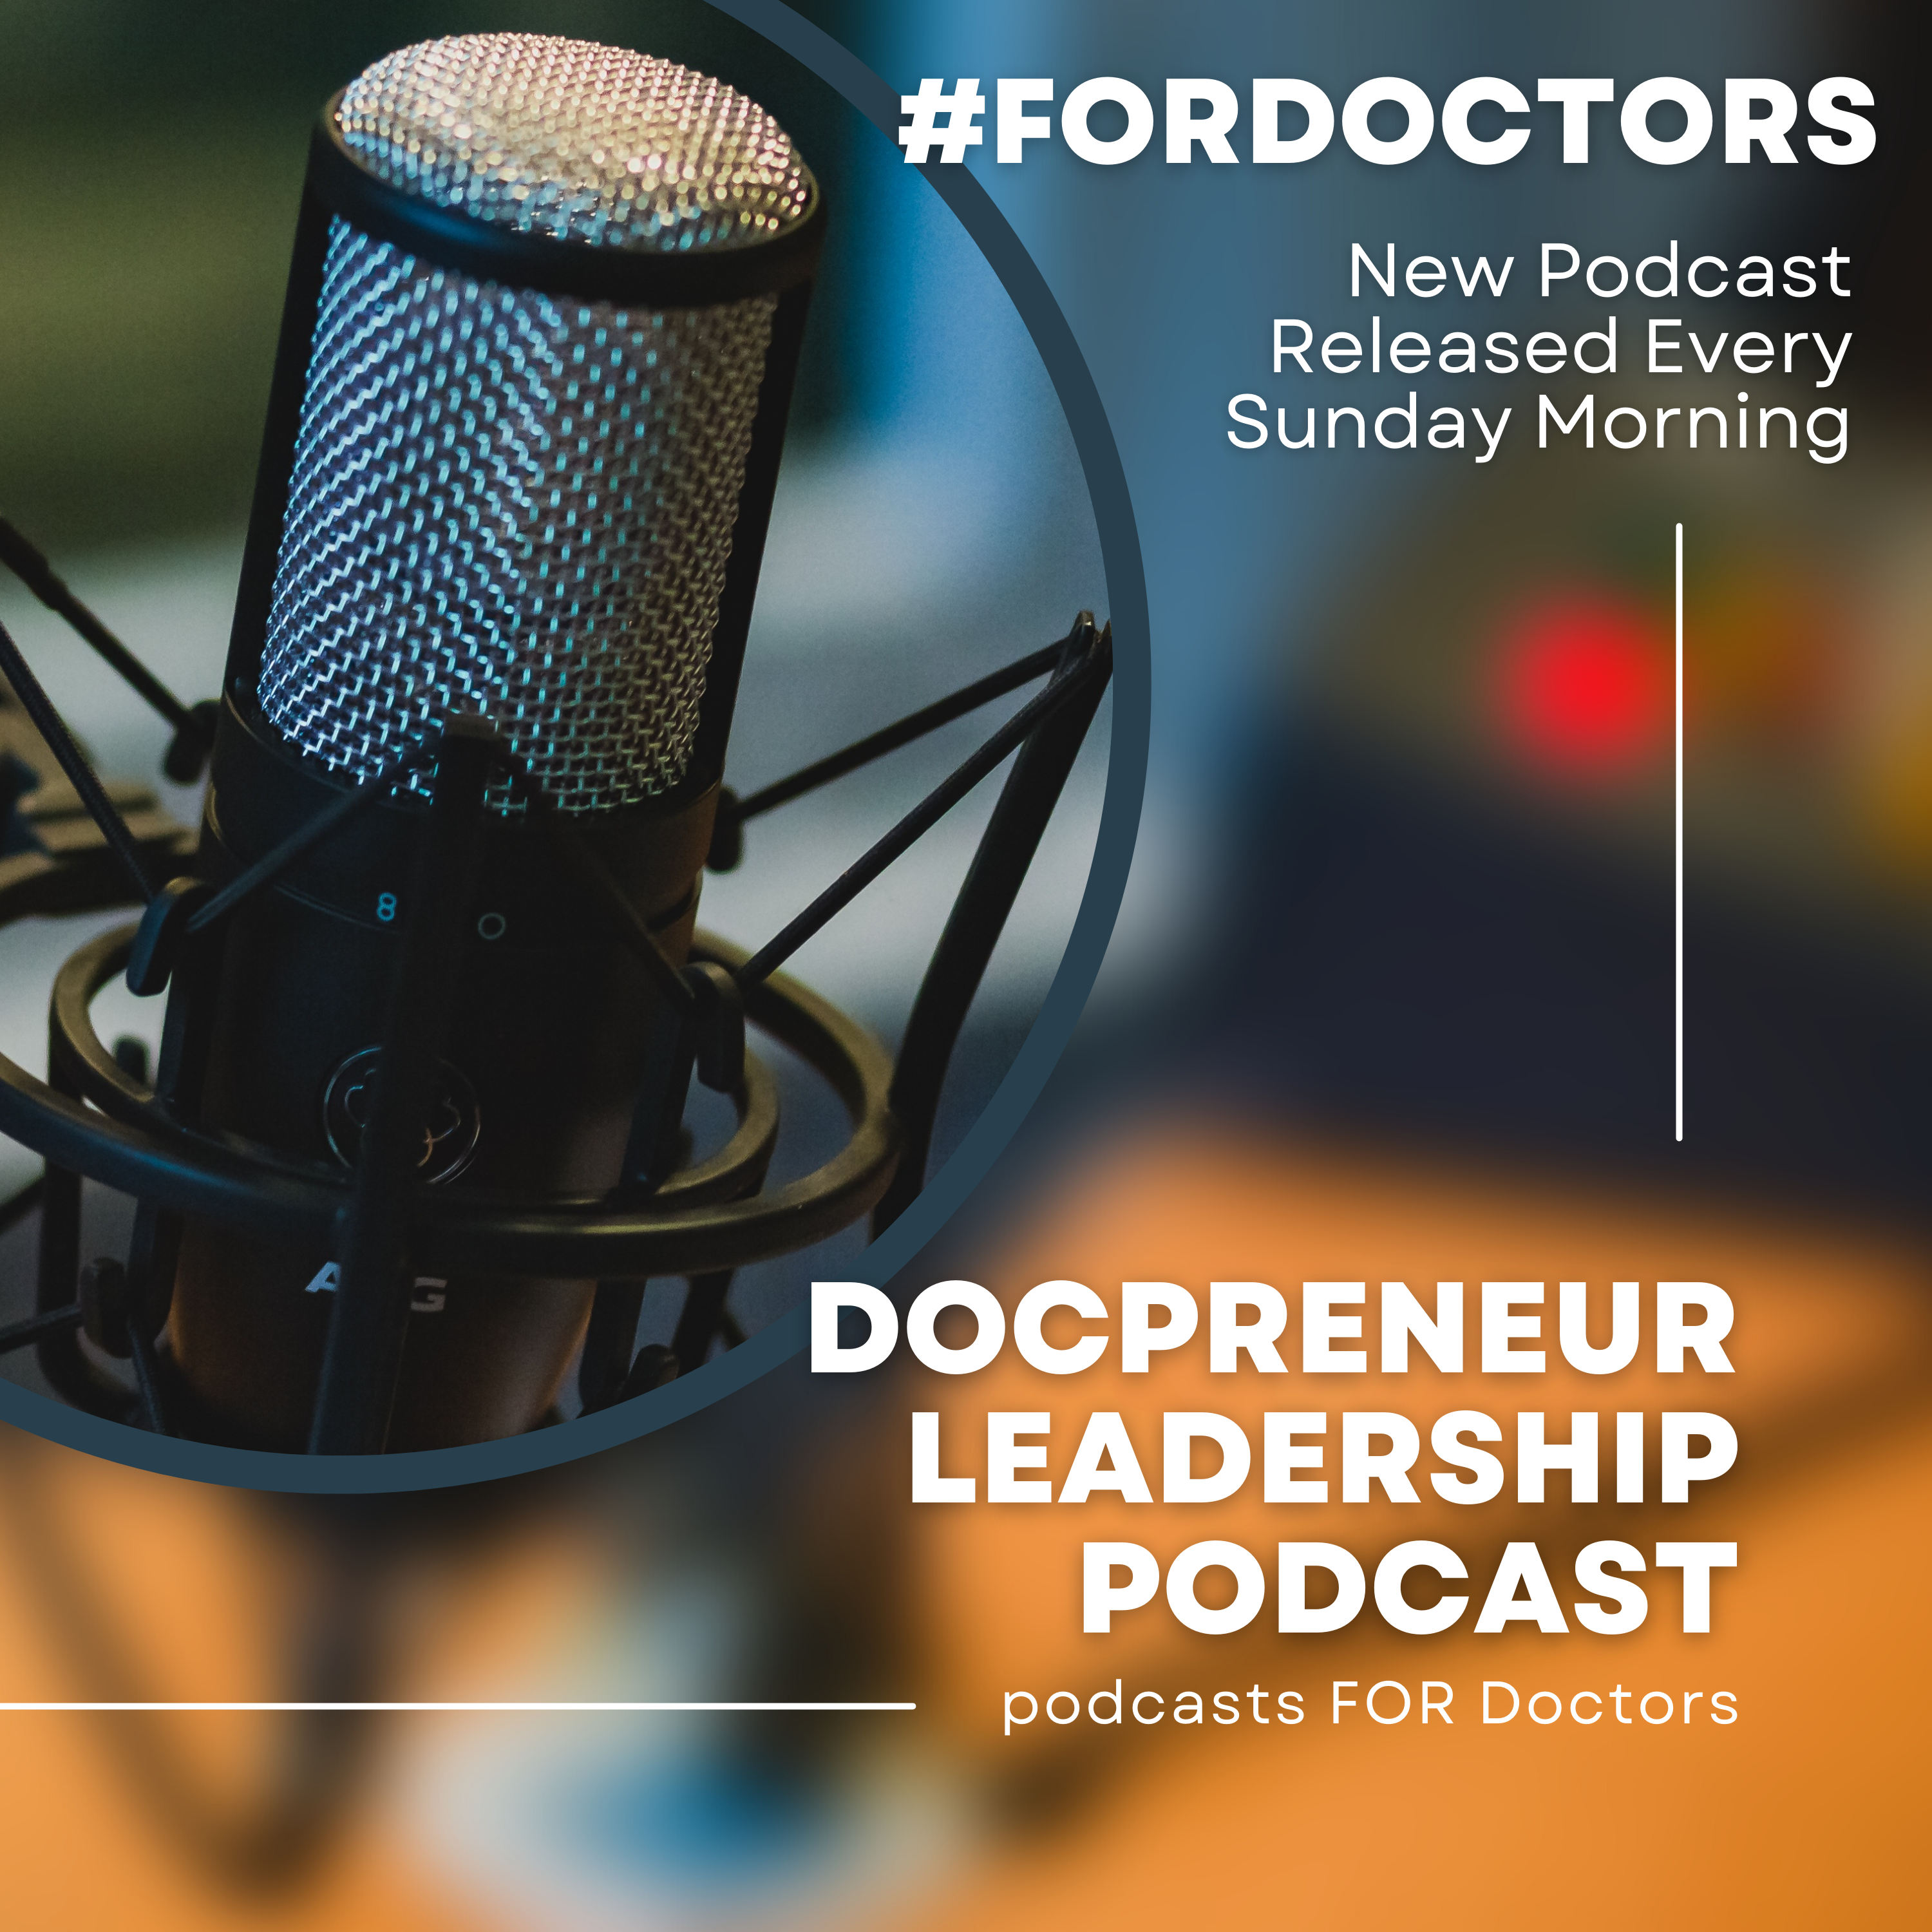 The DocPreneur Leadership Podcast by Concierge Medicine Today reaches its 300th Episode with Special Guest, Dr. Dana Corriel, the Founder/CEO of SoMeDocs!